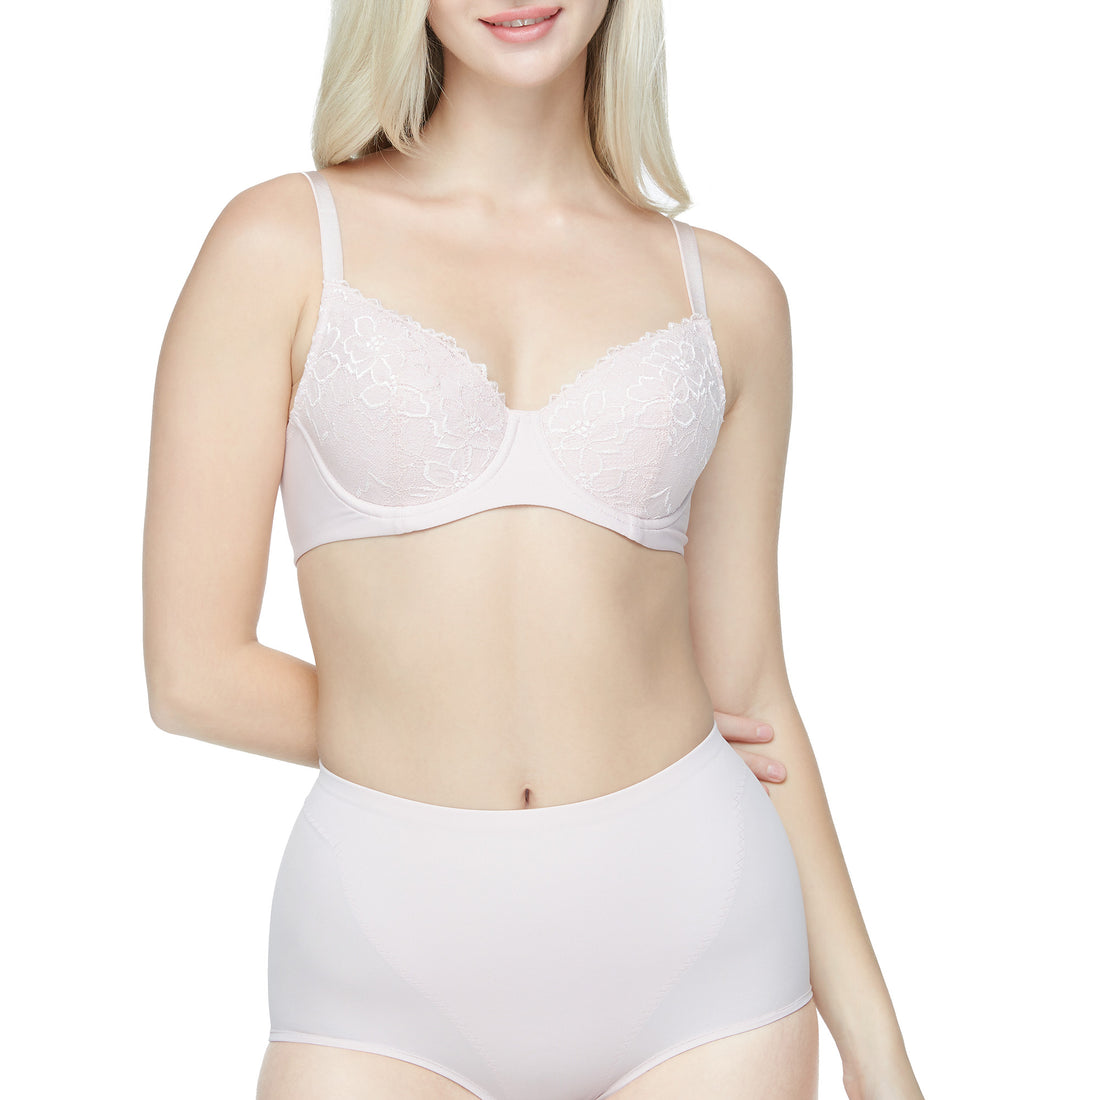 Wacoal Gold, a healthy bra with soft underwire support No sponge added, model WO1725 (paired with WO3116), wild rose pink (WR)